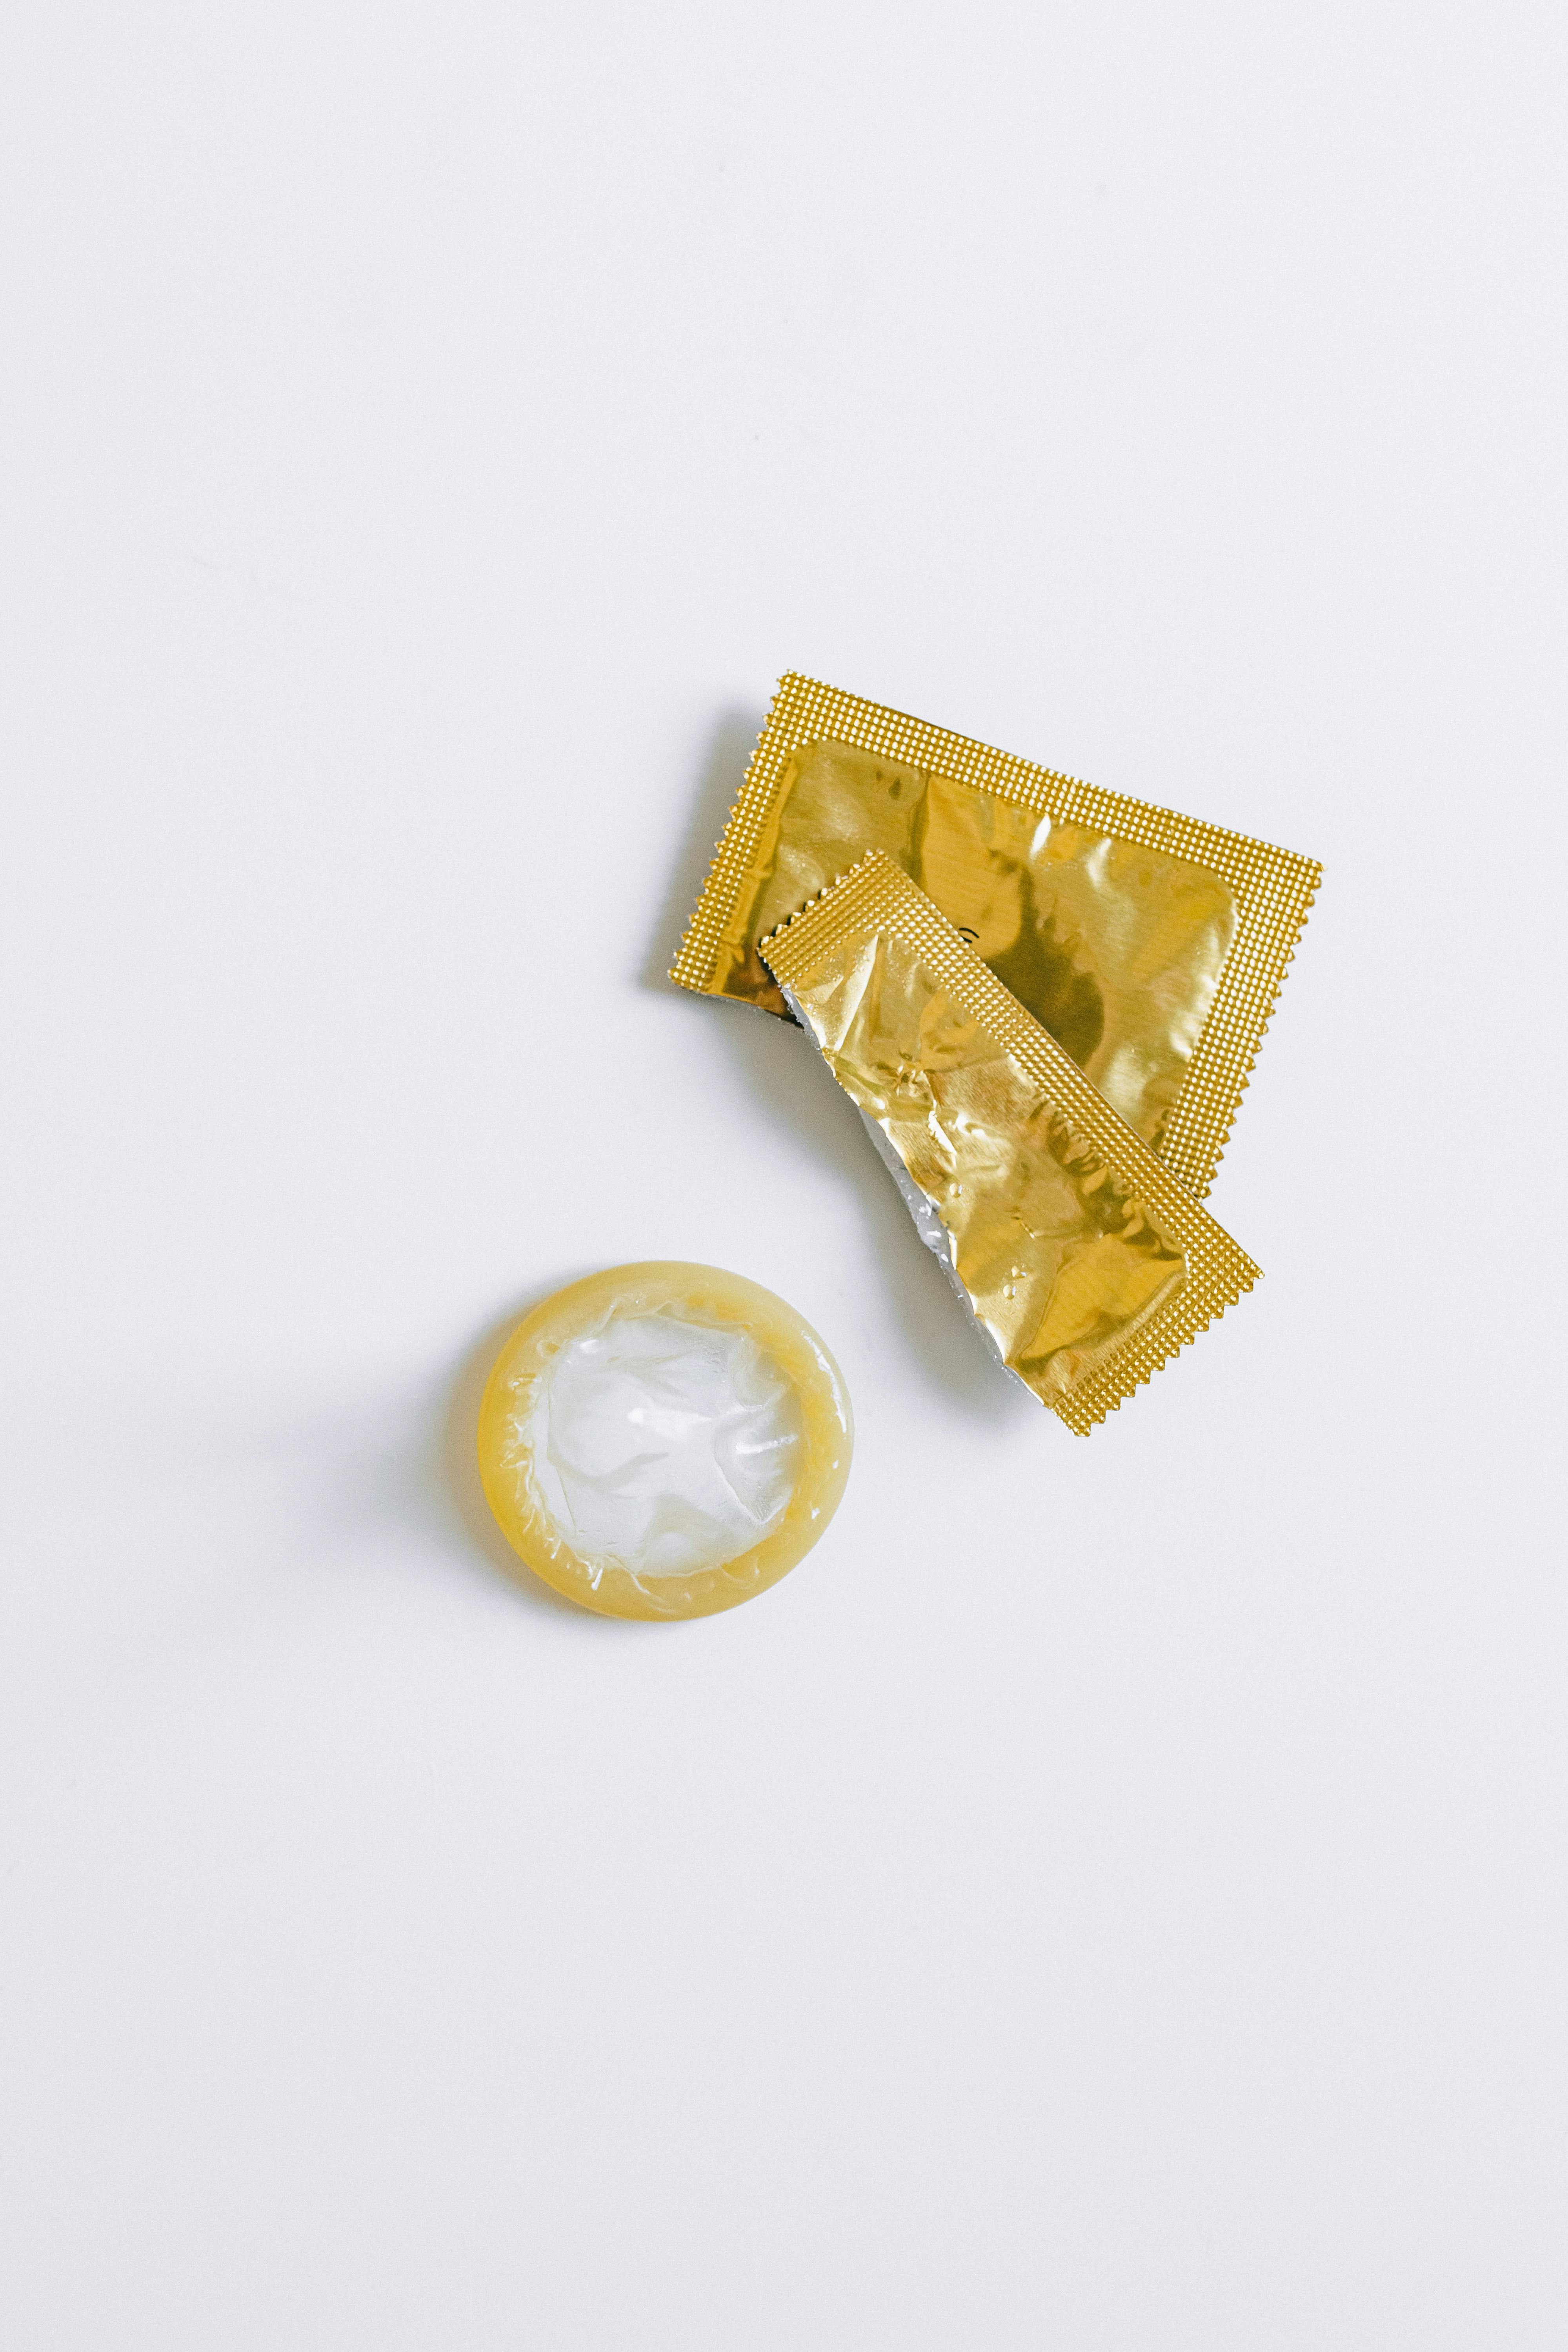 unwrapped condom on white surface